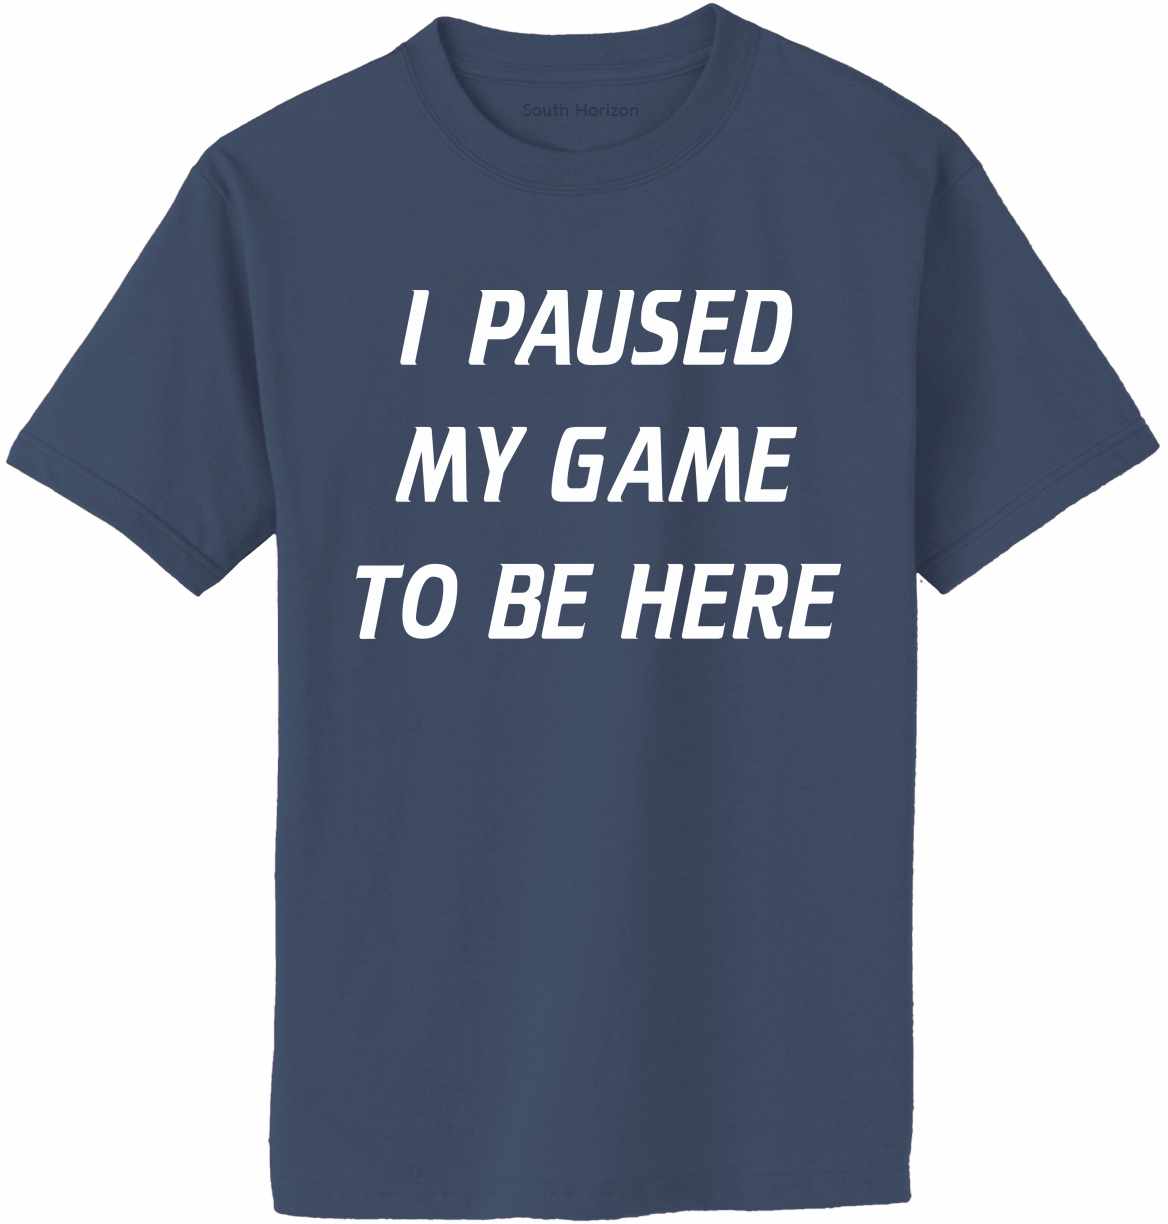 I Paused My Game to Be Here Adult T-Shirt (#970-1)